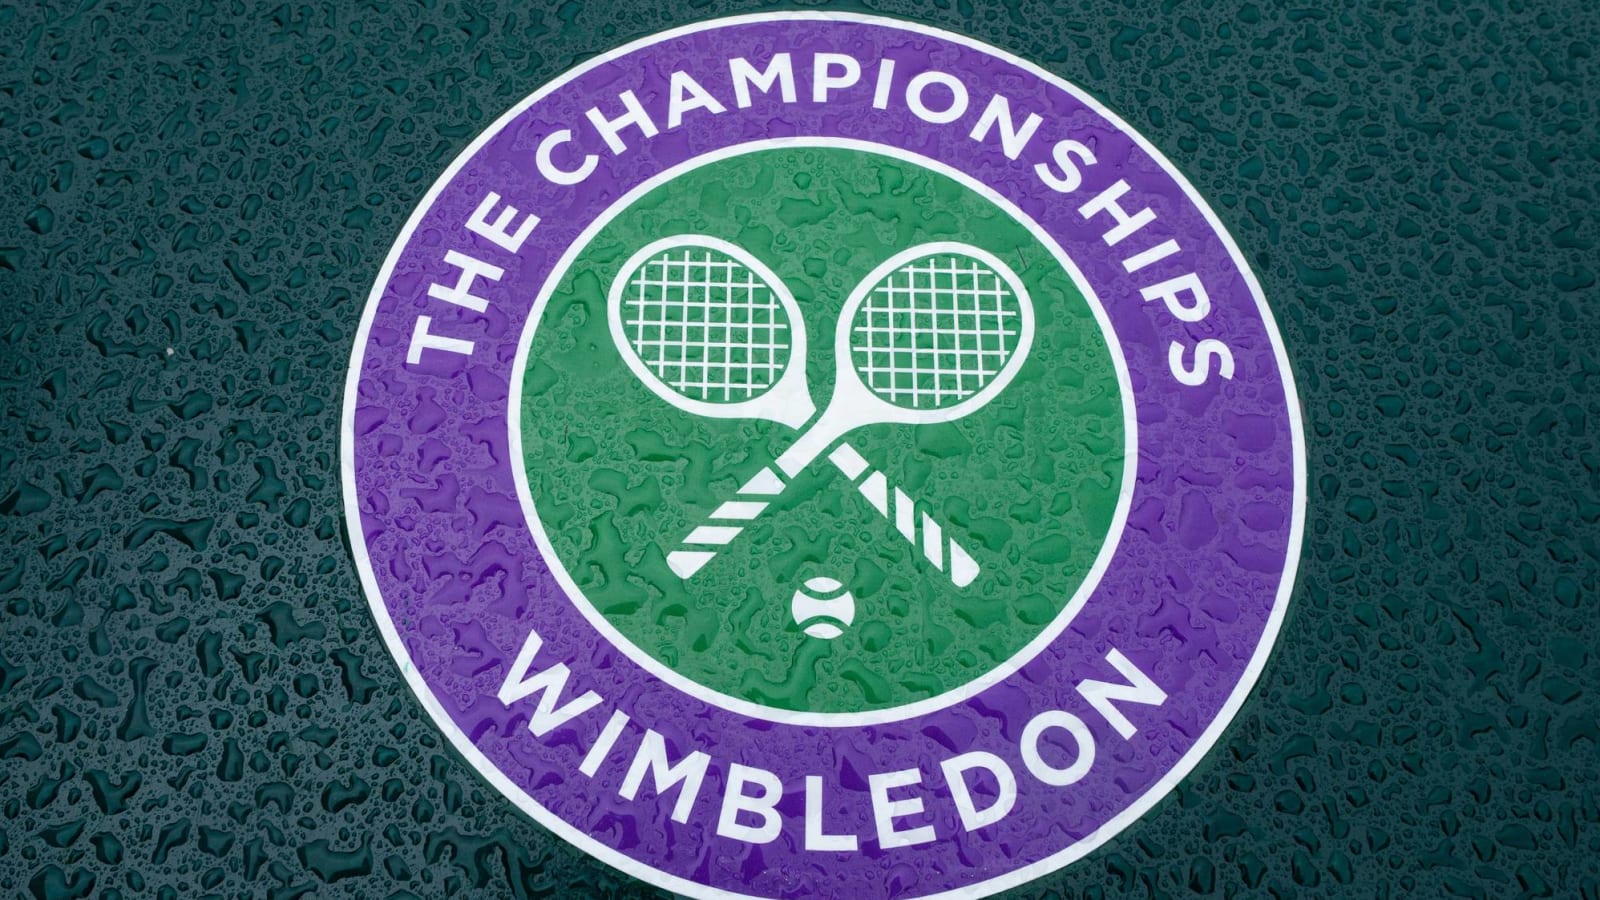 AELTC plans to have 2021 Wimbledon with or without fans